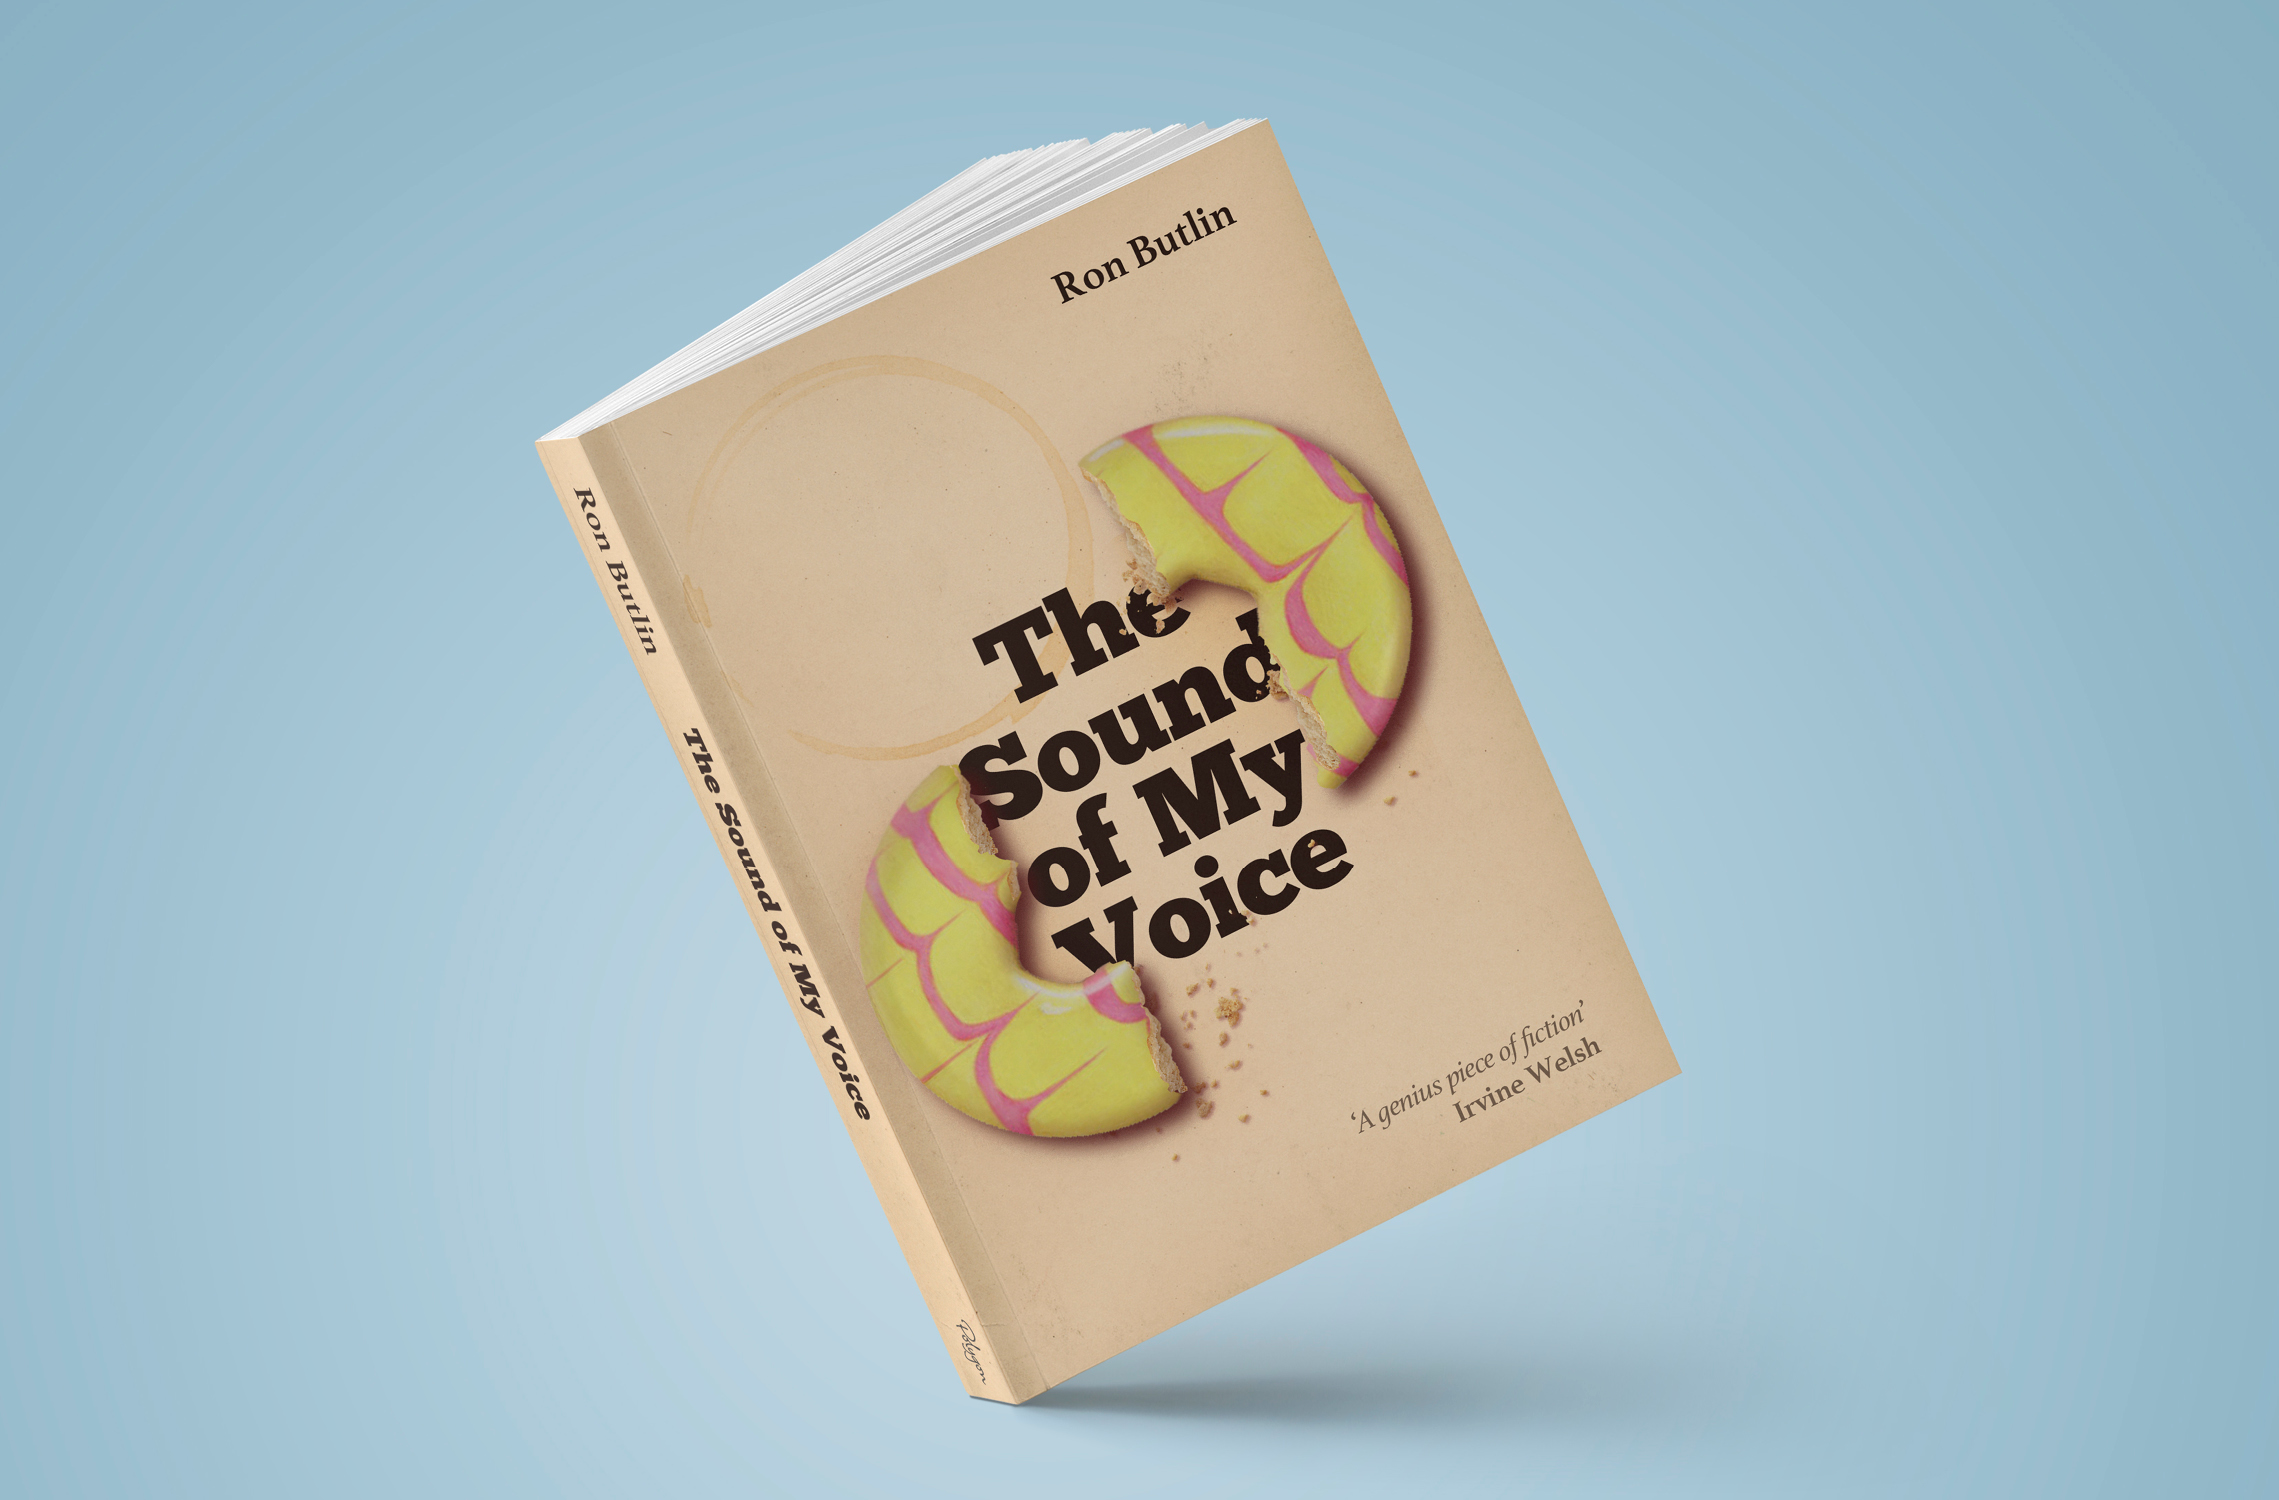 The sound of my voice book cover design